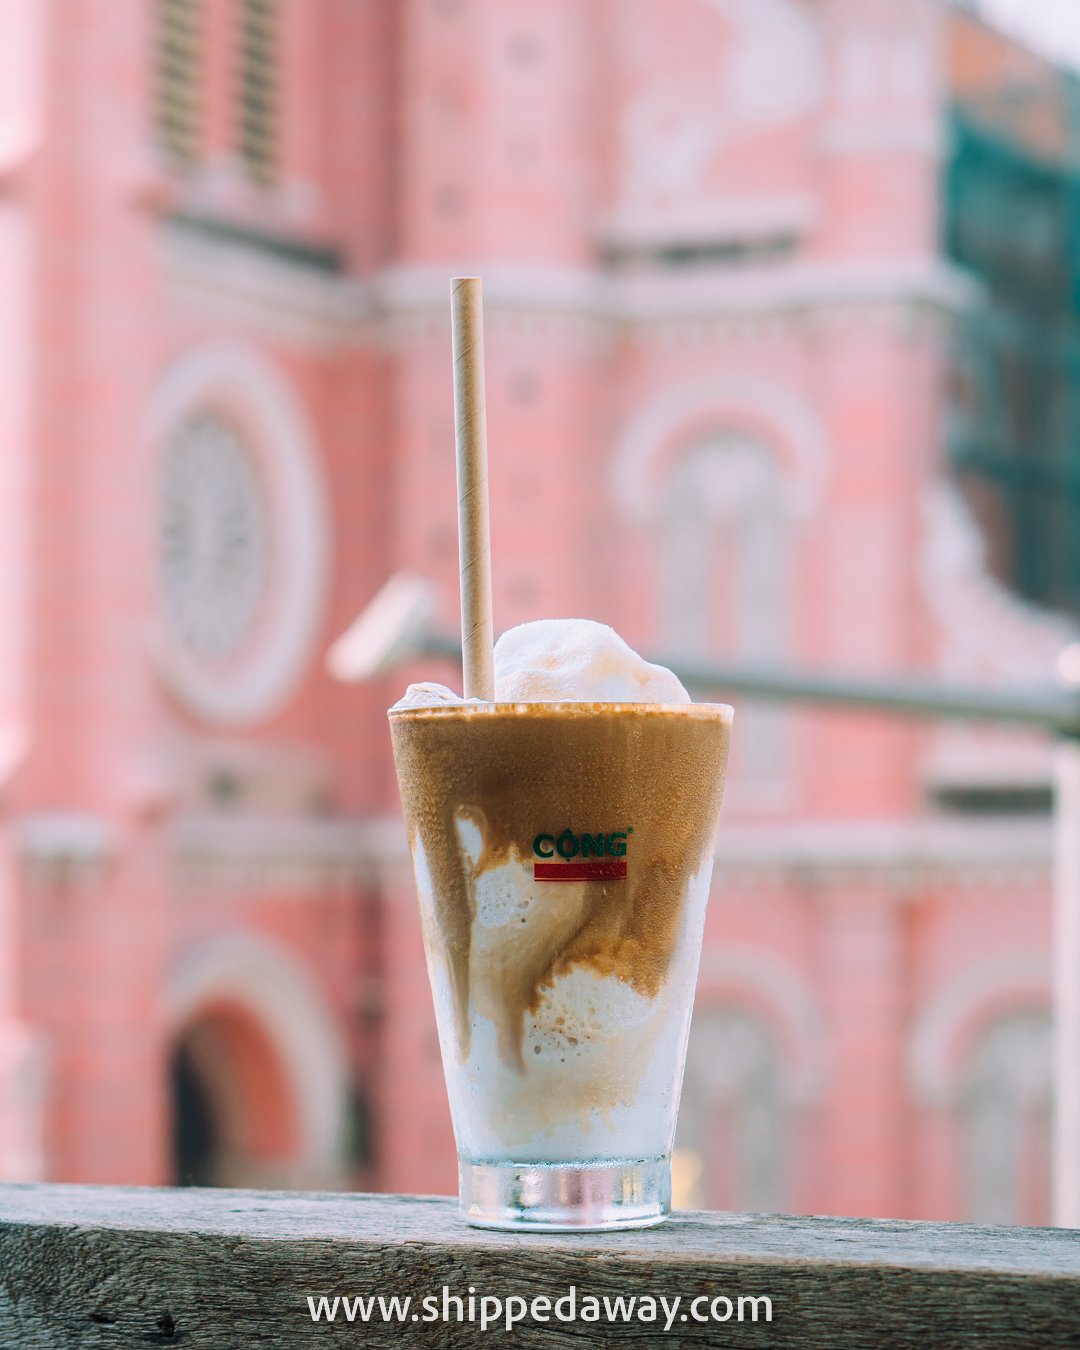 Coconut coffee at Cong Caphe next to the Pink Church, Ho Chi Minh City, Vietnam